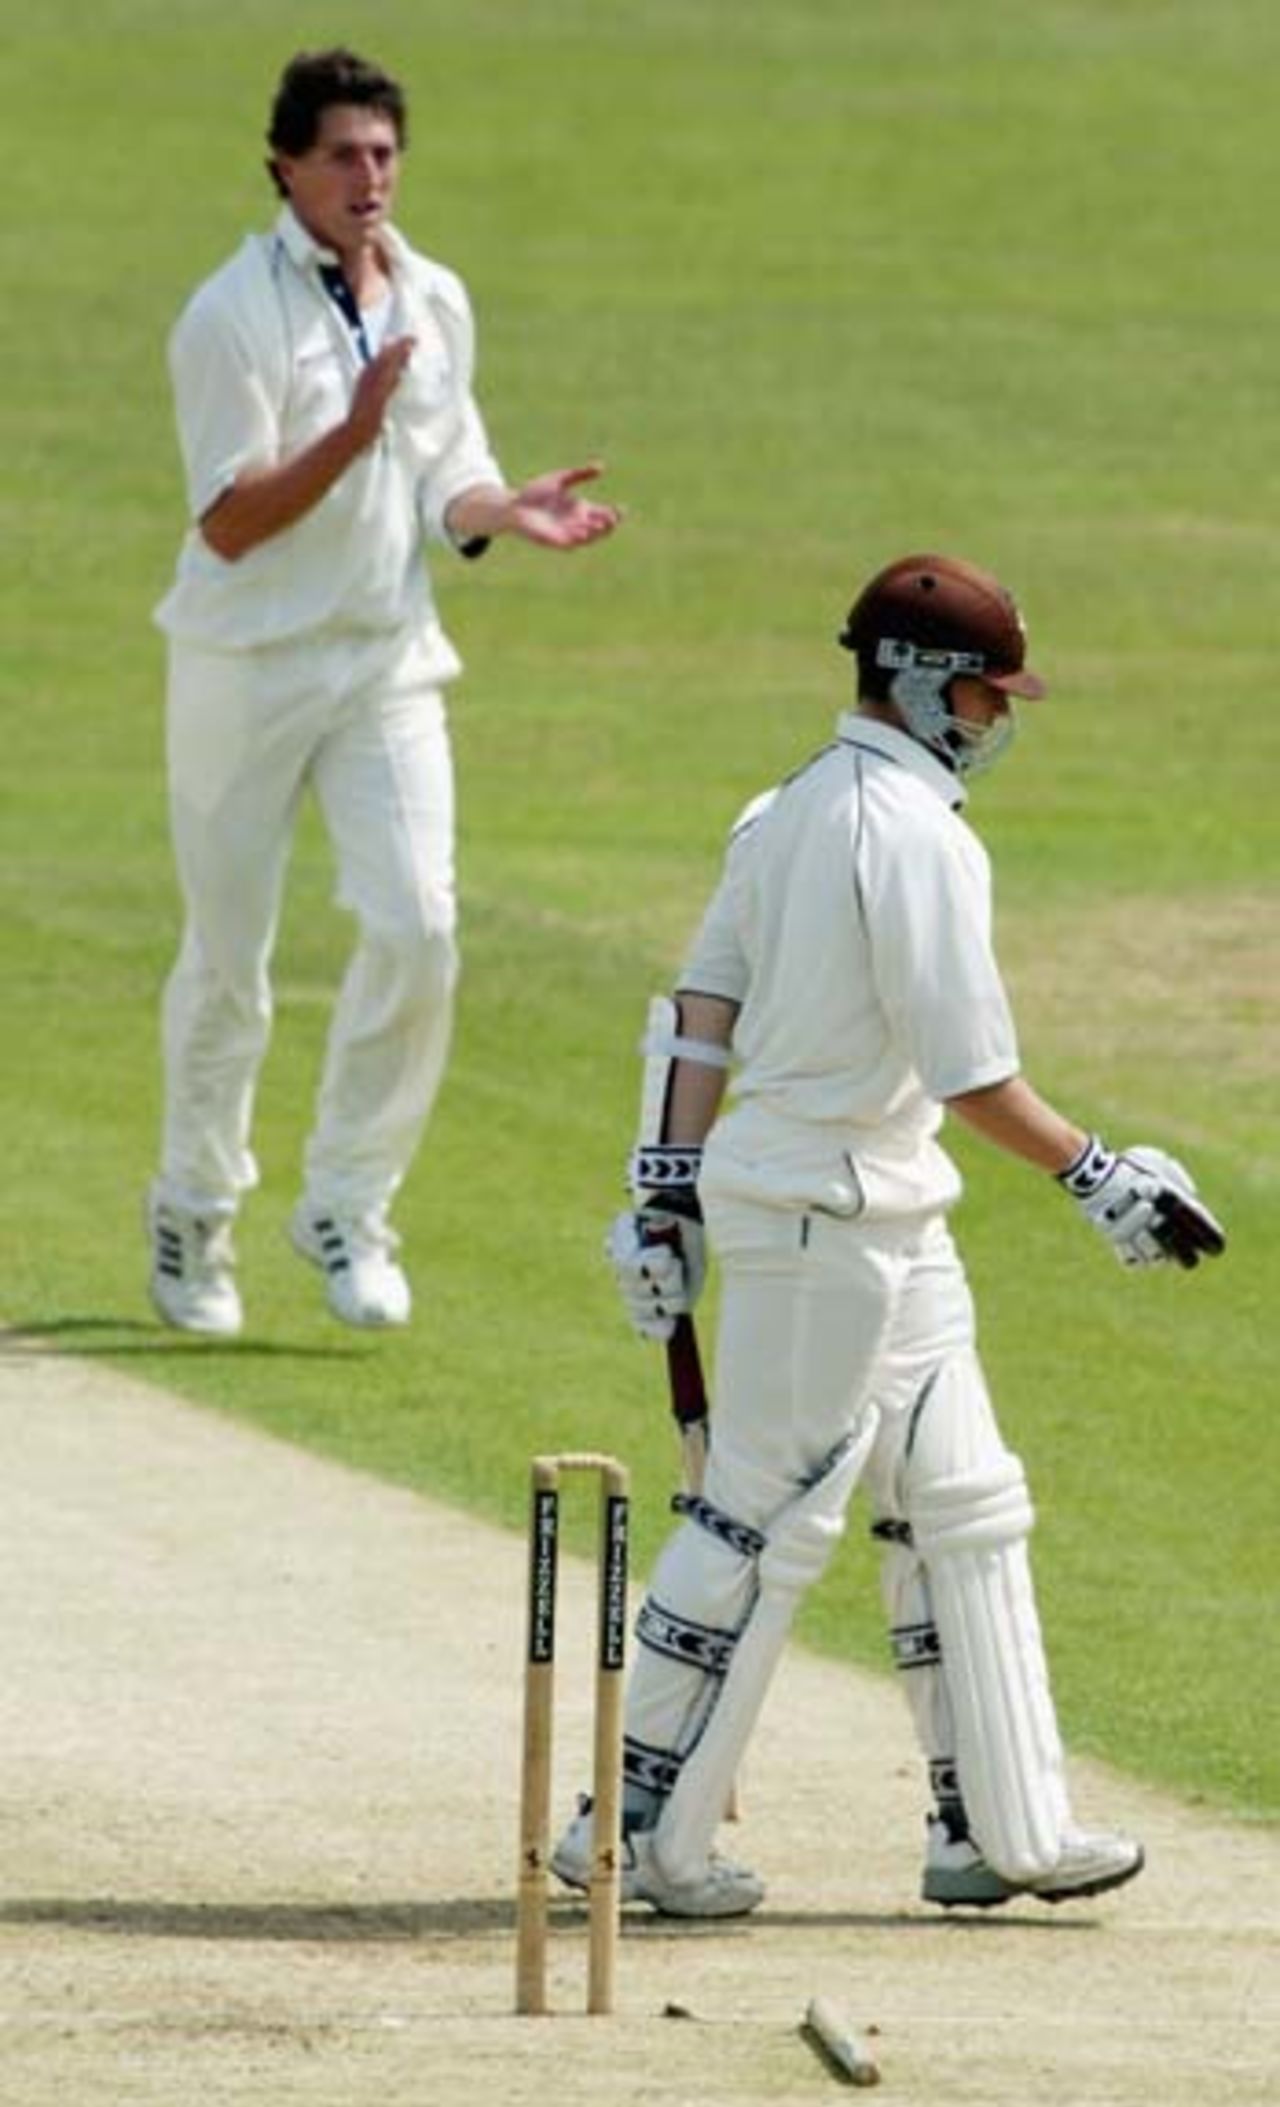 Jonathon Batty is bowled by a delighted Jon Lewis, Gloucestershire v Surrey, Bristol, June 2, 2004